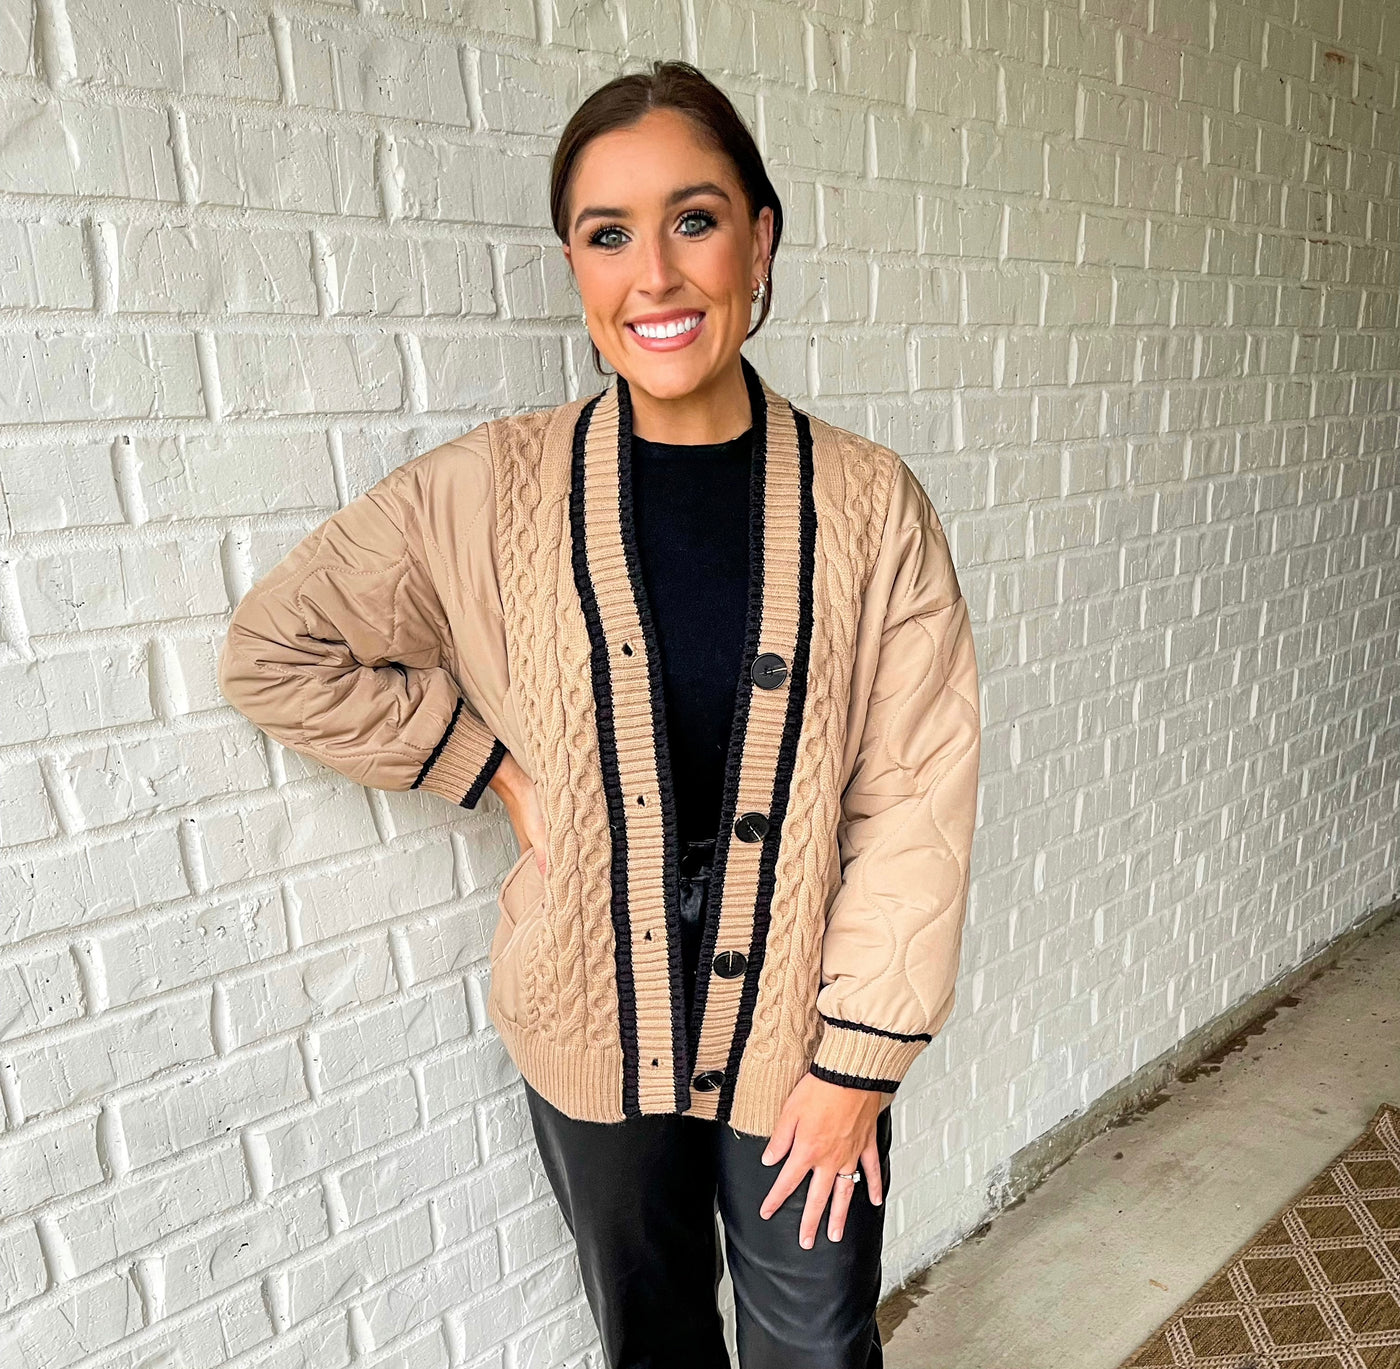 The Coffee Queen Jacket from Shop Silvs is a quilted sweater jacket that's perfect for layering in fall and winter months.